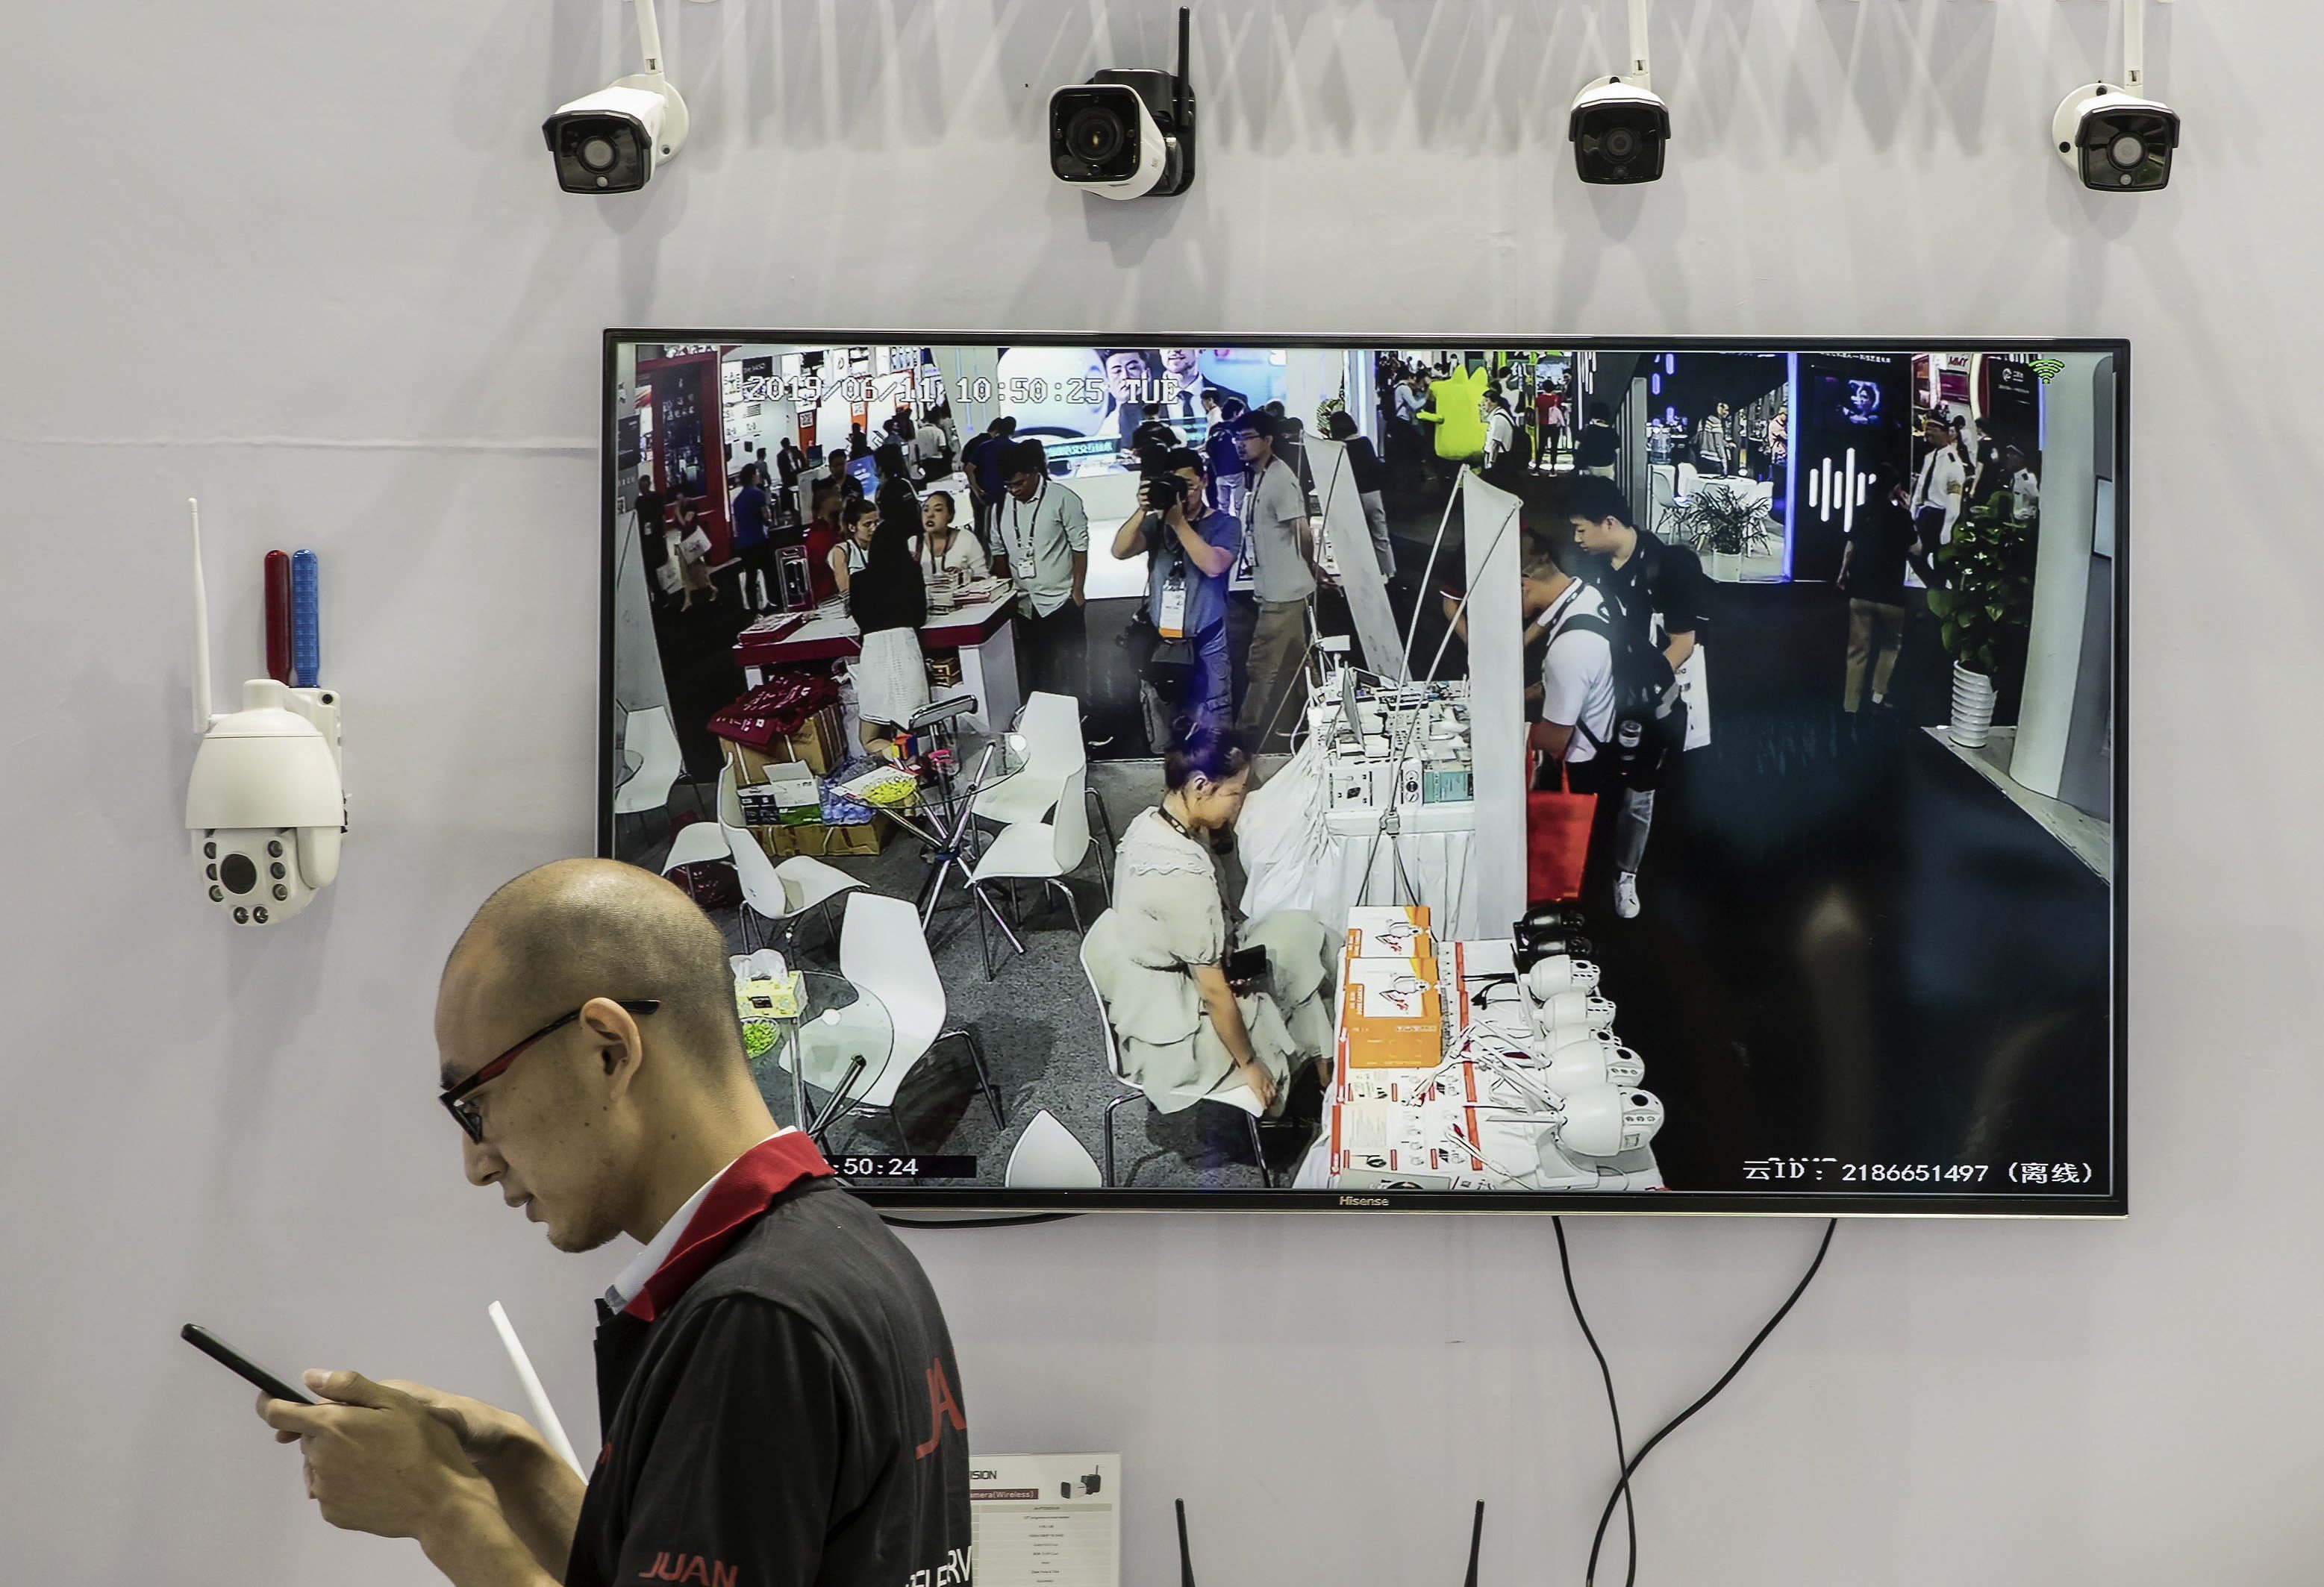 Surveillance cameras and a screen are displayed at a Guangzhou Juan Intelligent Tech Joint Stock Co. facial recognition display area during the CES Asia Show in Shanghai, June 11, 2019. Photo: Bloomberg